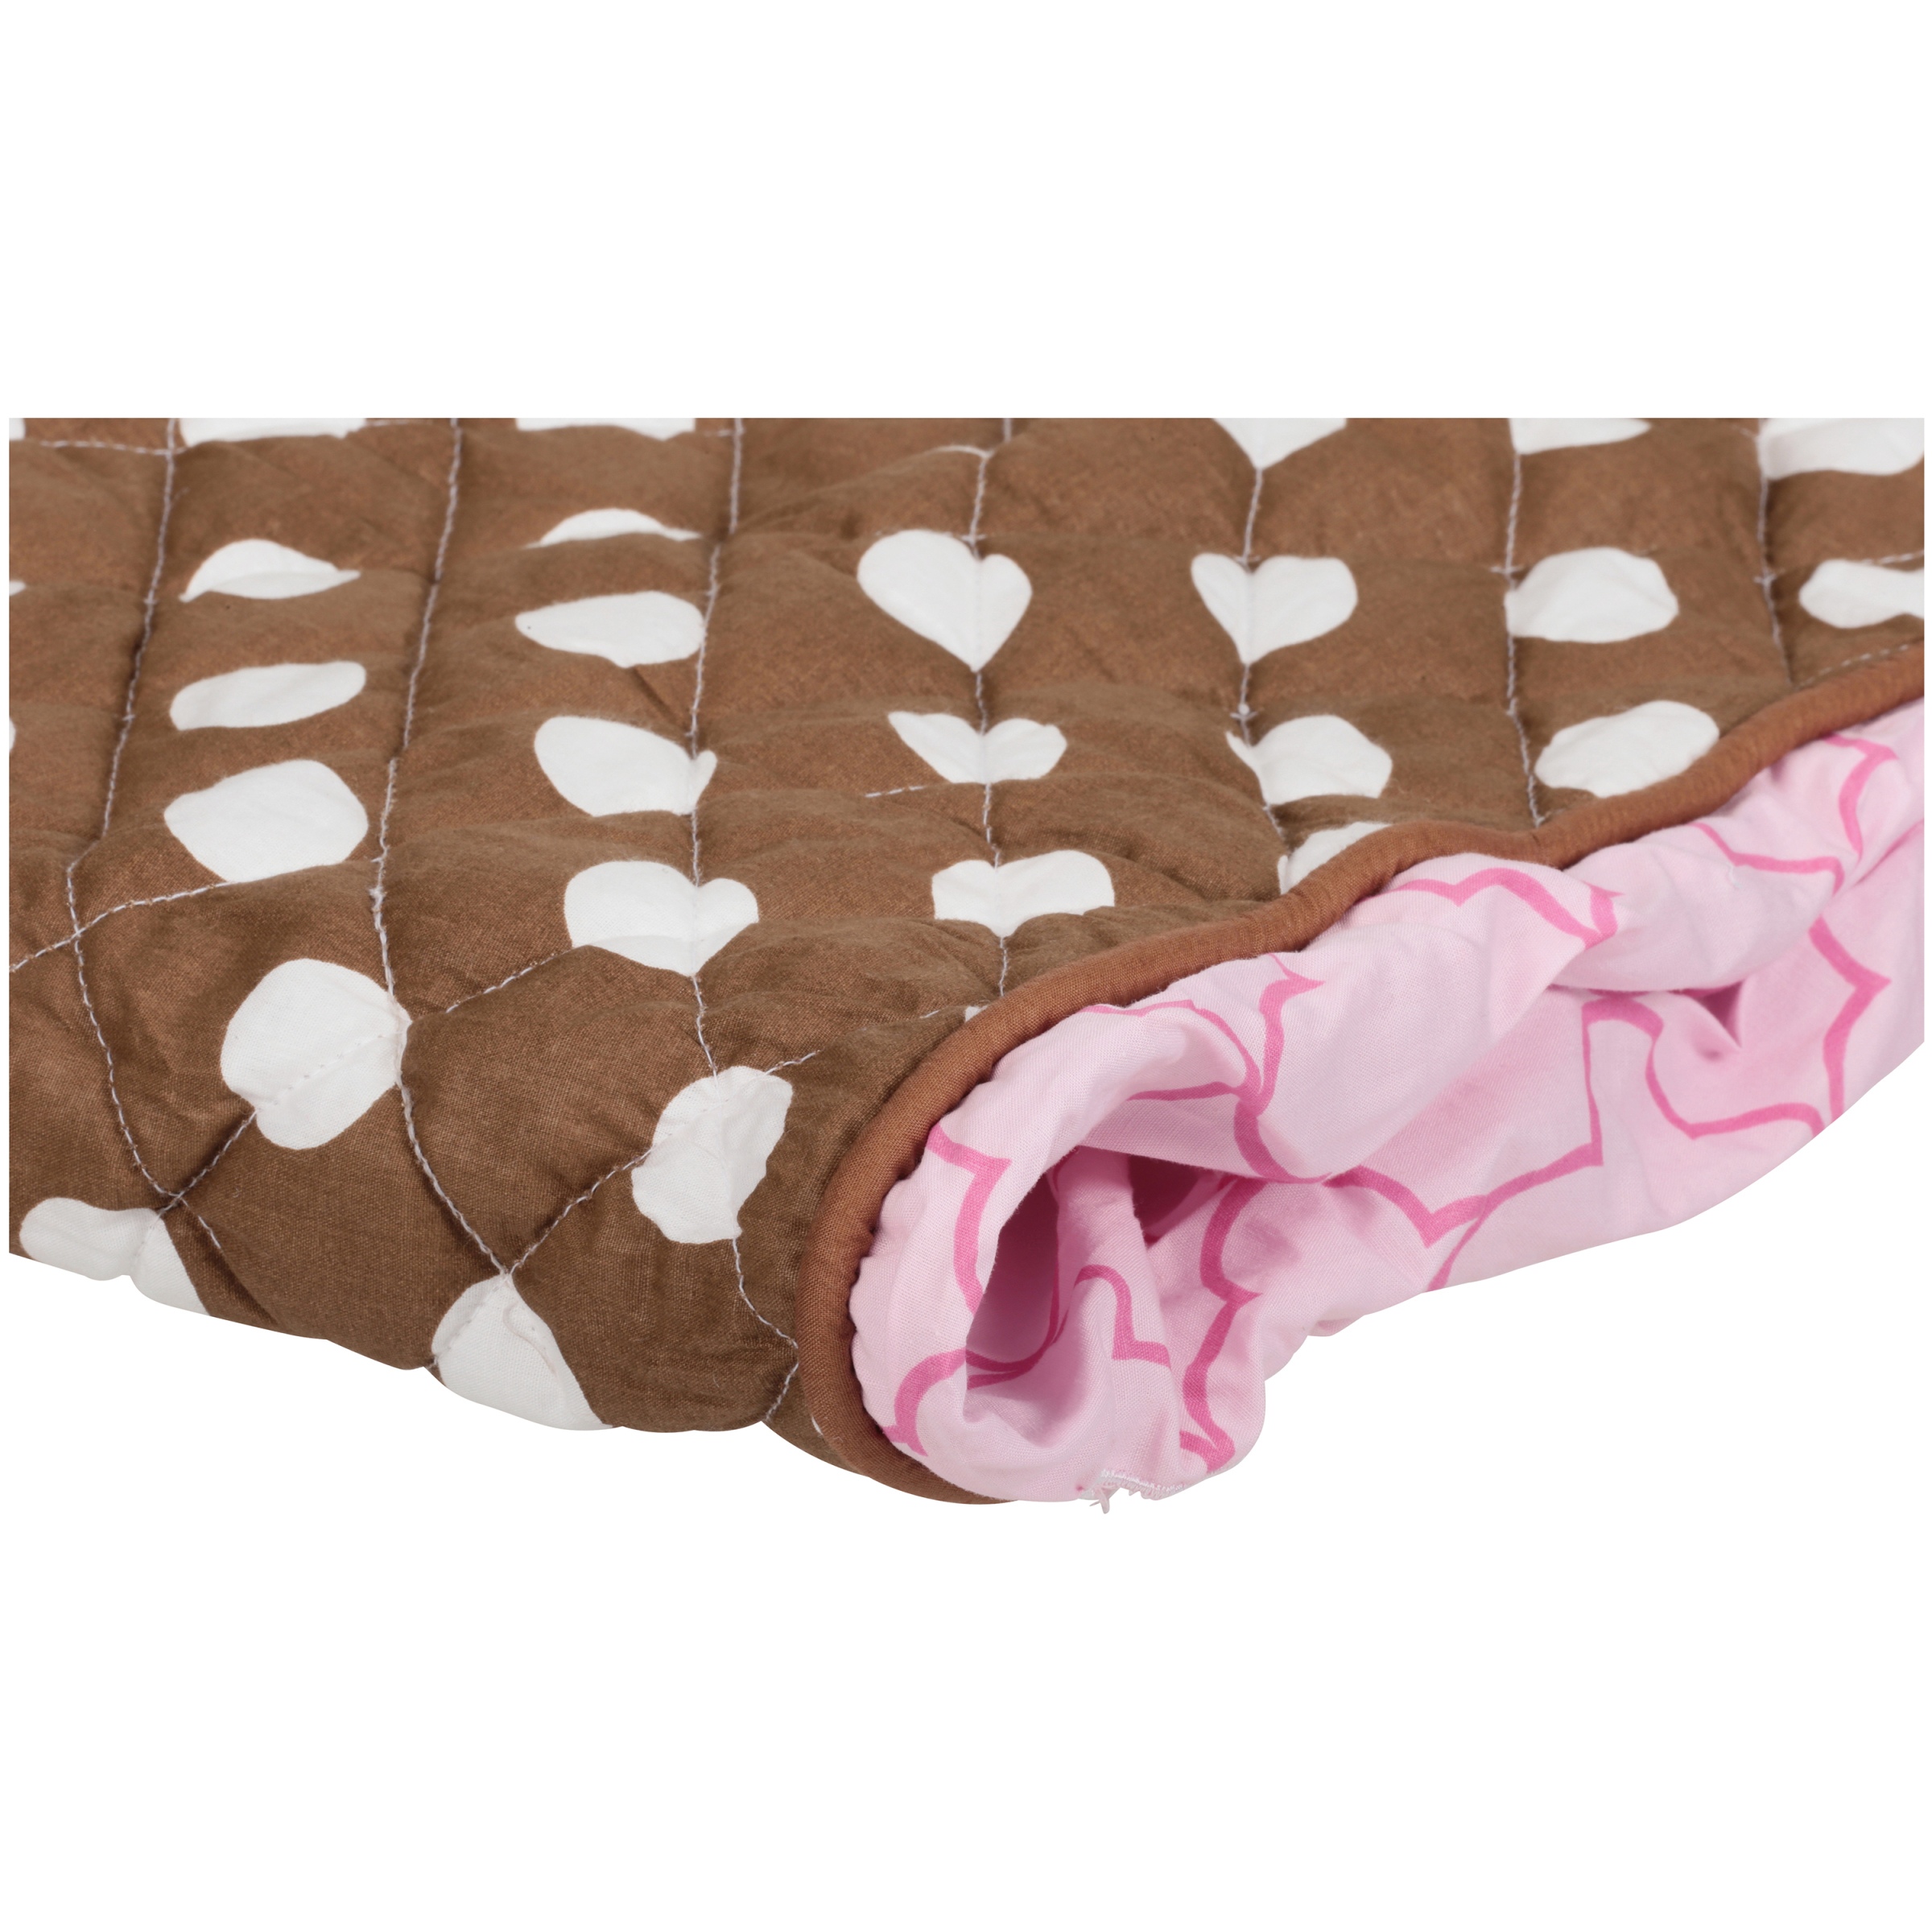 Bacati Butterflies Pink/Chocolate Changing Pad Cover - image 3 of 5